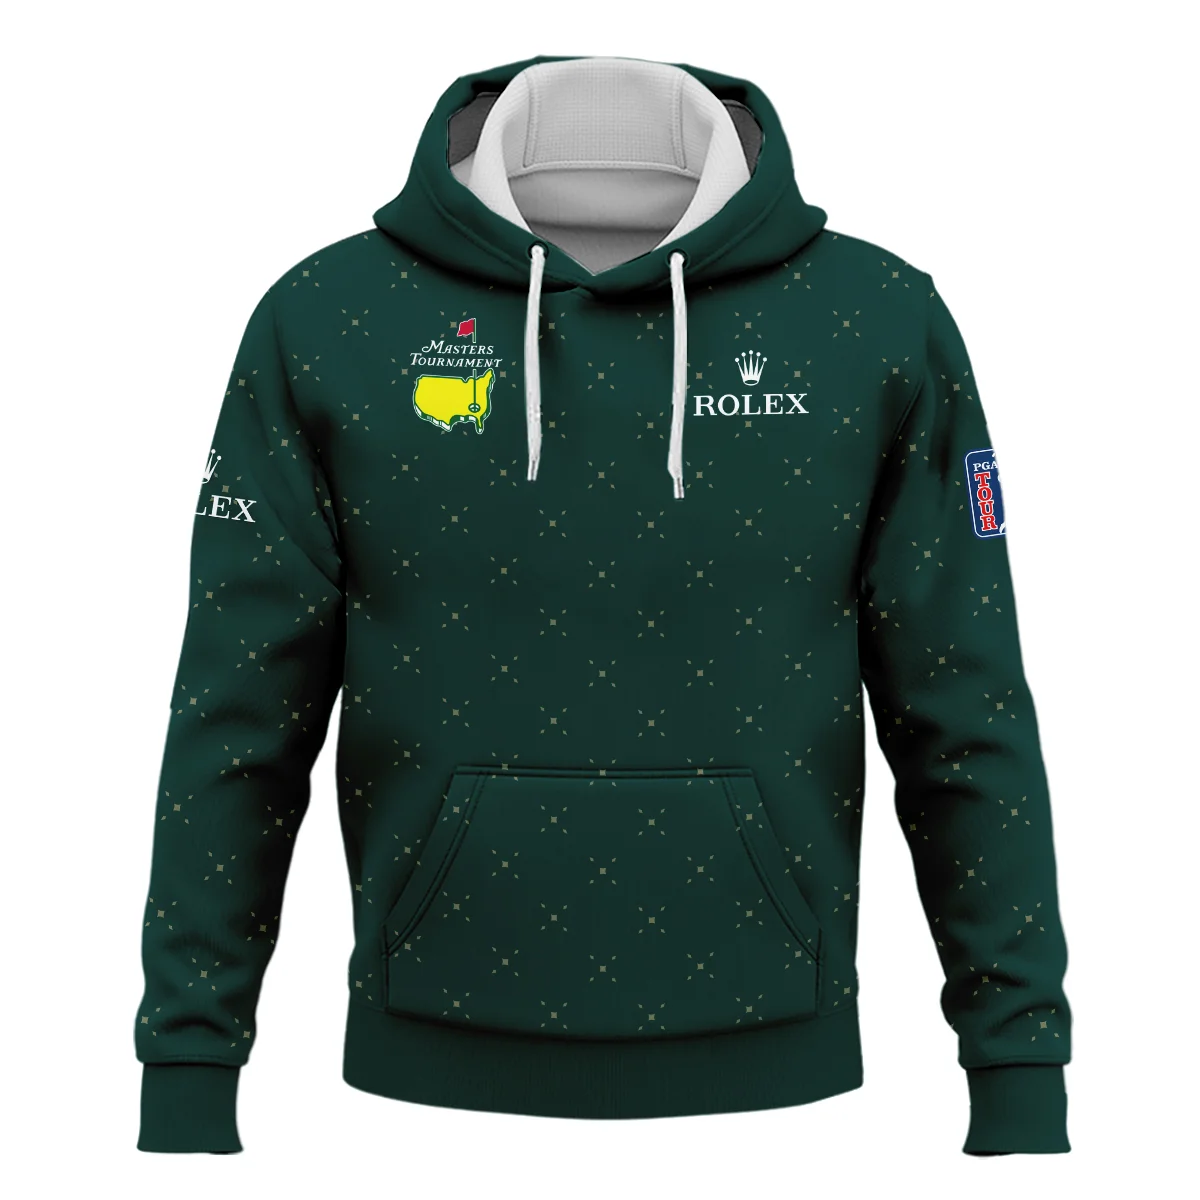 Diamond Shapes With Geometric Pattern Masters Tournament Rolex Hoodie Shirt Style Classic Hoodie Shirt